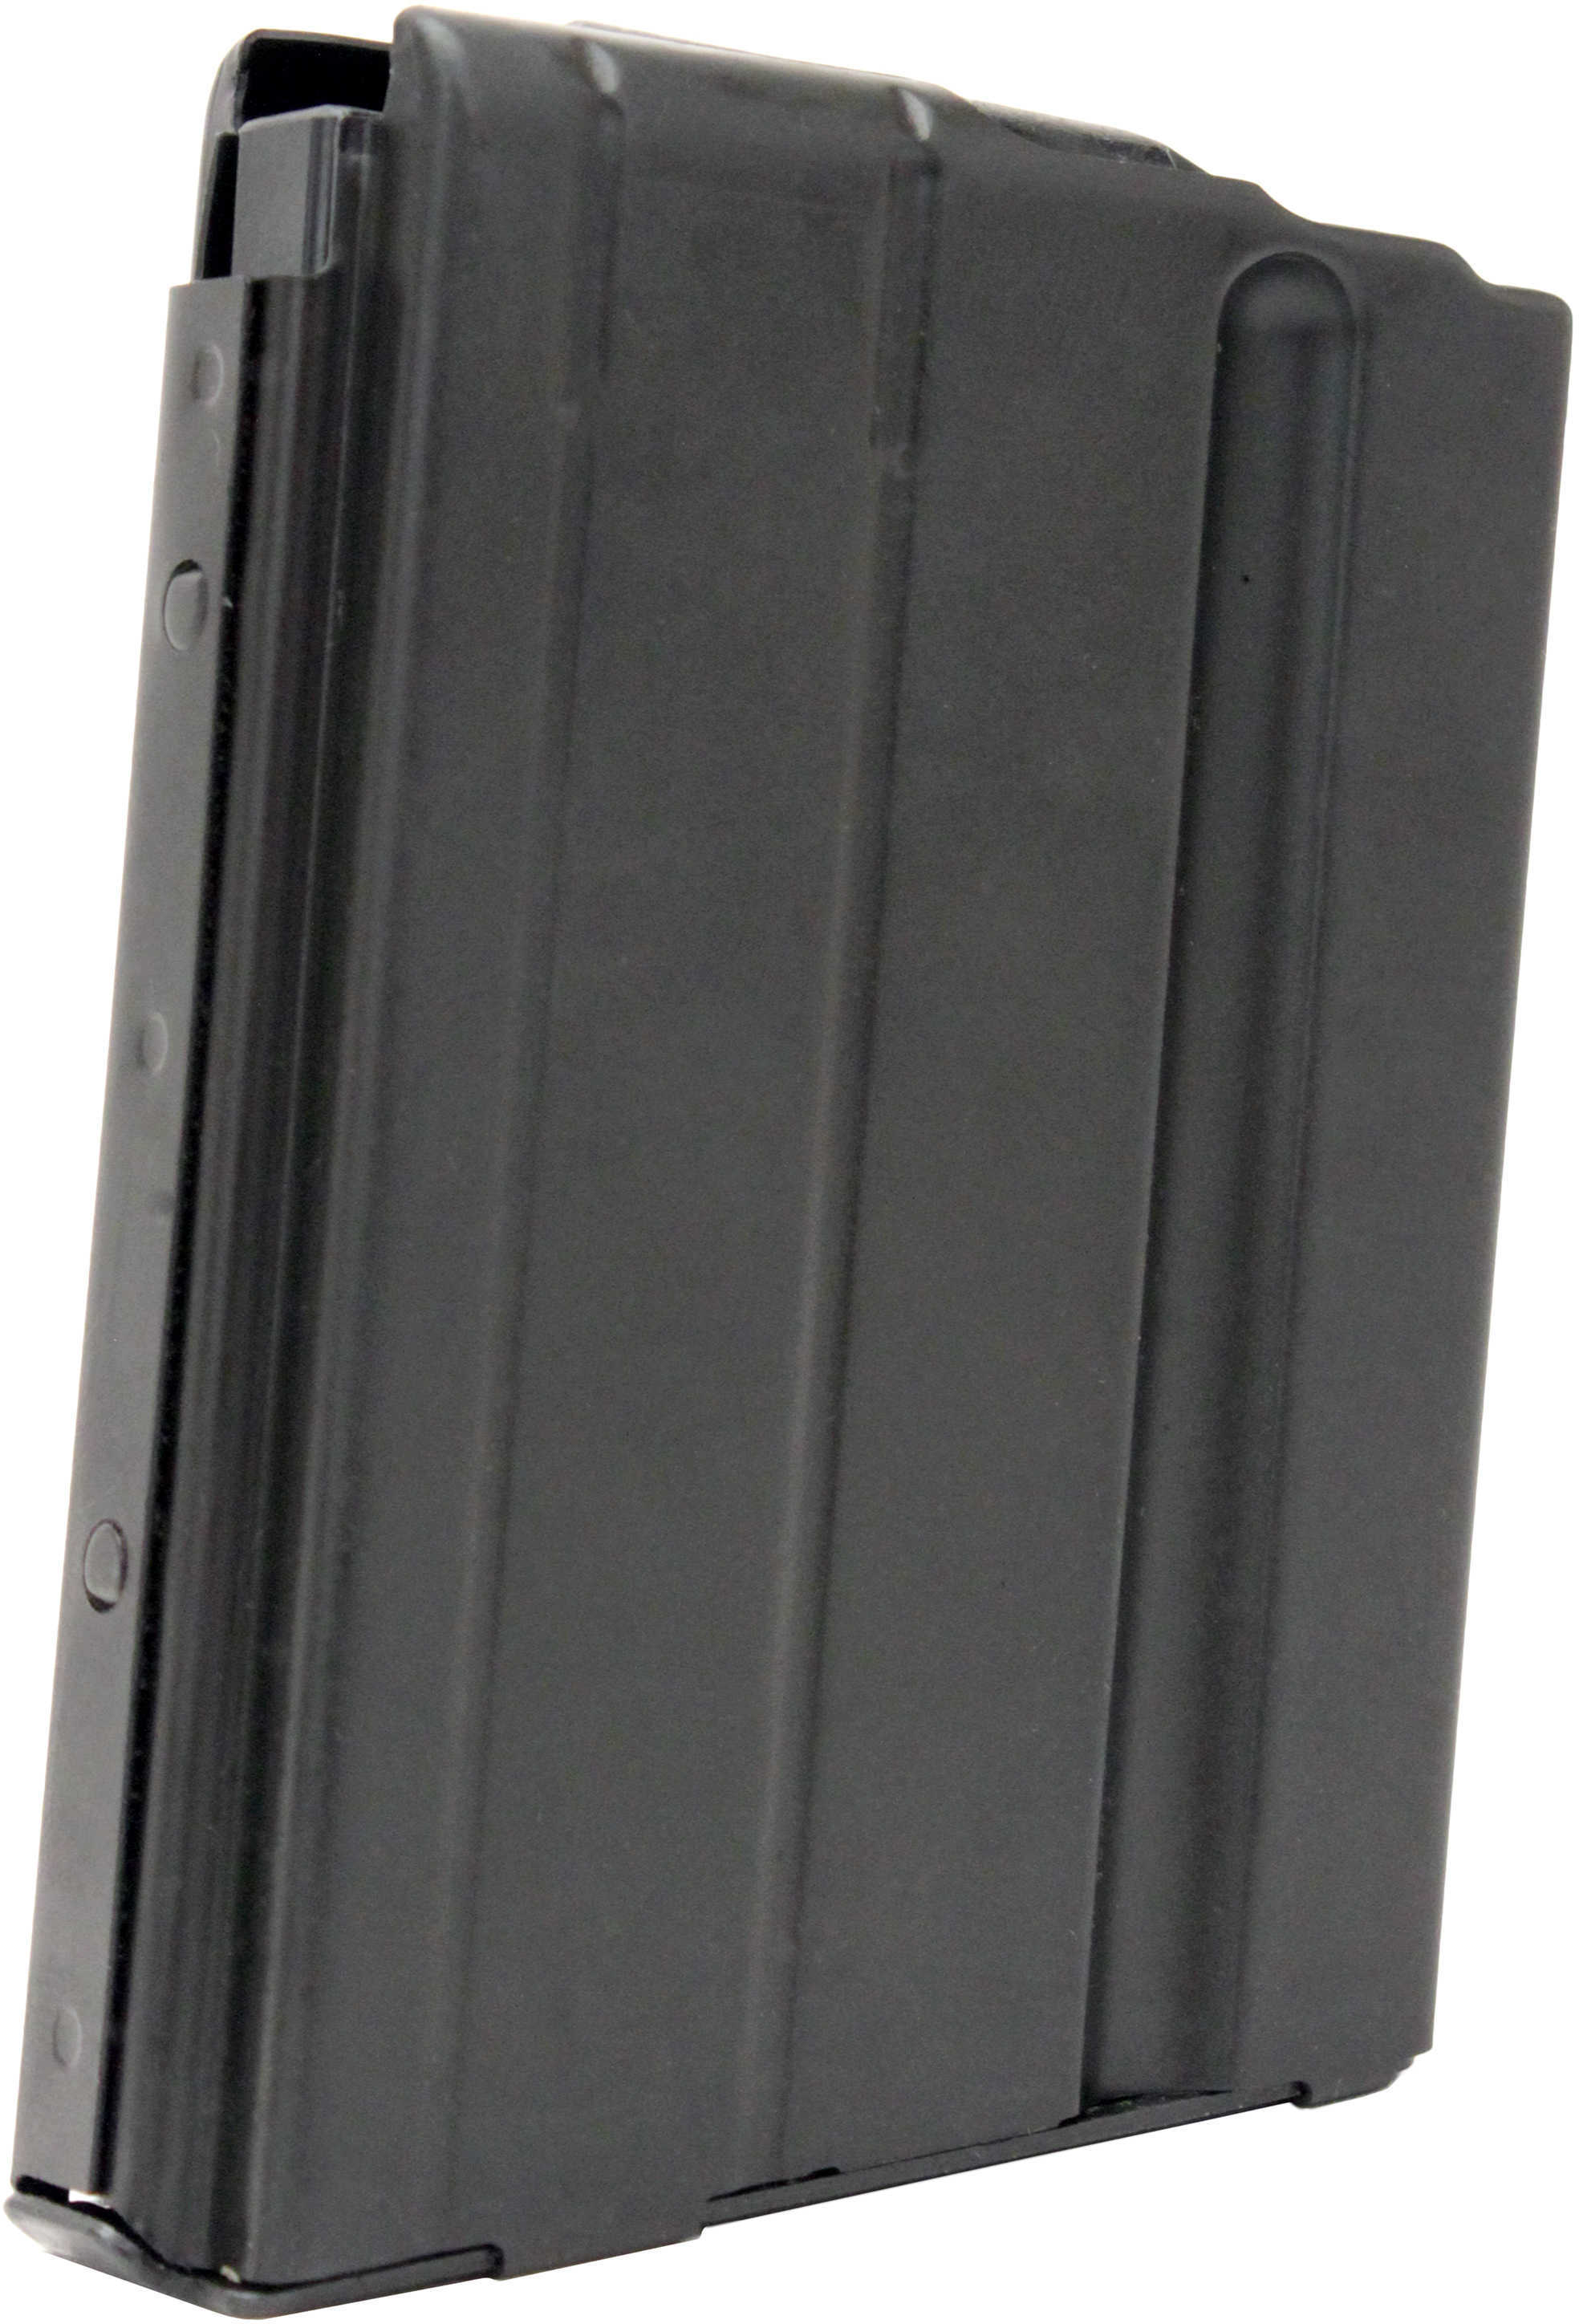 AR-15 Magazine C-Products 7.62X39 Stainless Steel Matte Black/Black Follower 10 Rounds